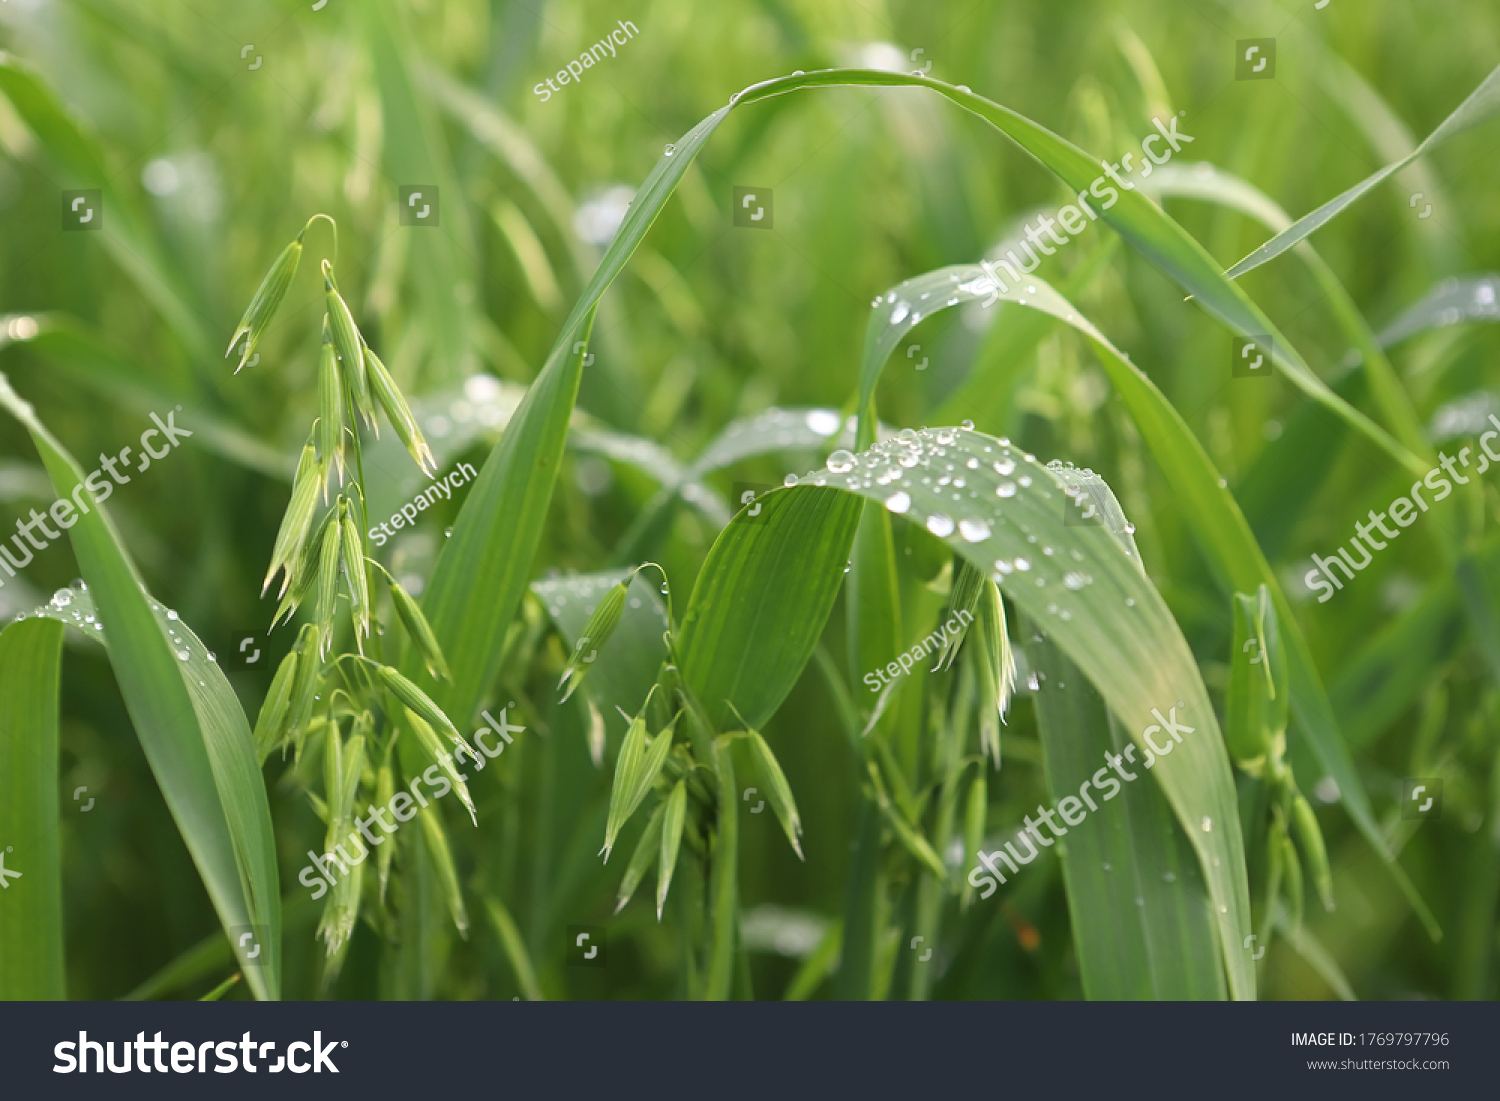 Young green oats on a field in rainy weather. Oat field on a background of blue sky and white clouds. Field of young green oats. The concept of a good harvest, agricultural industry. #1769797796